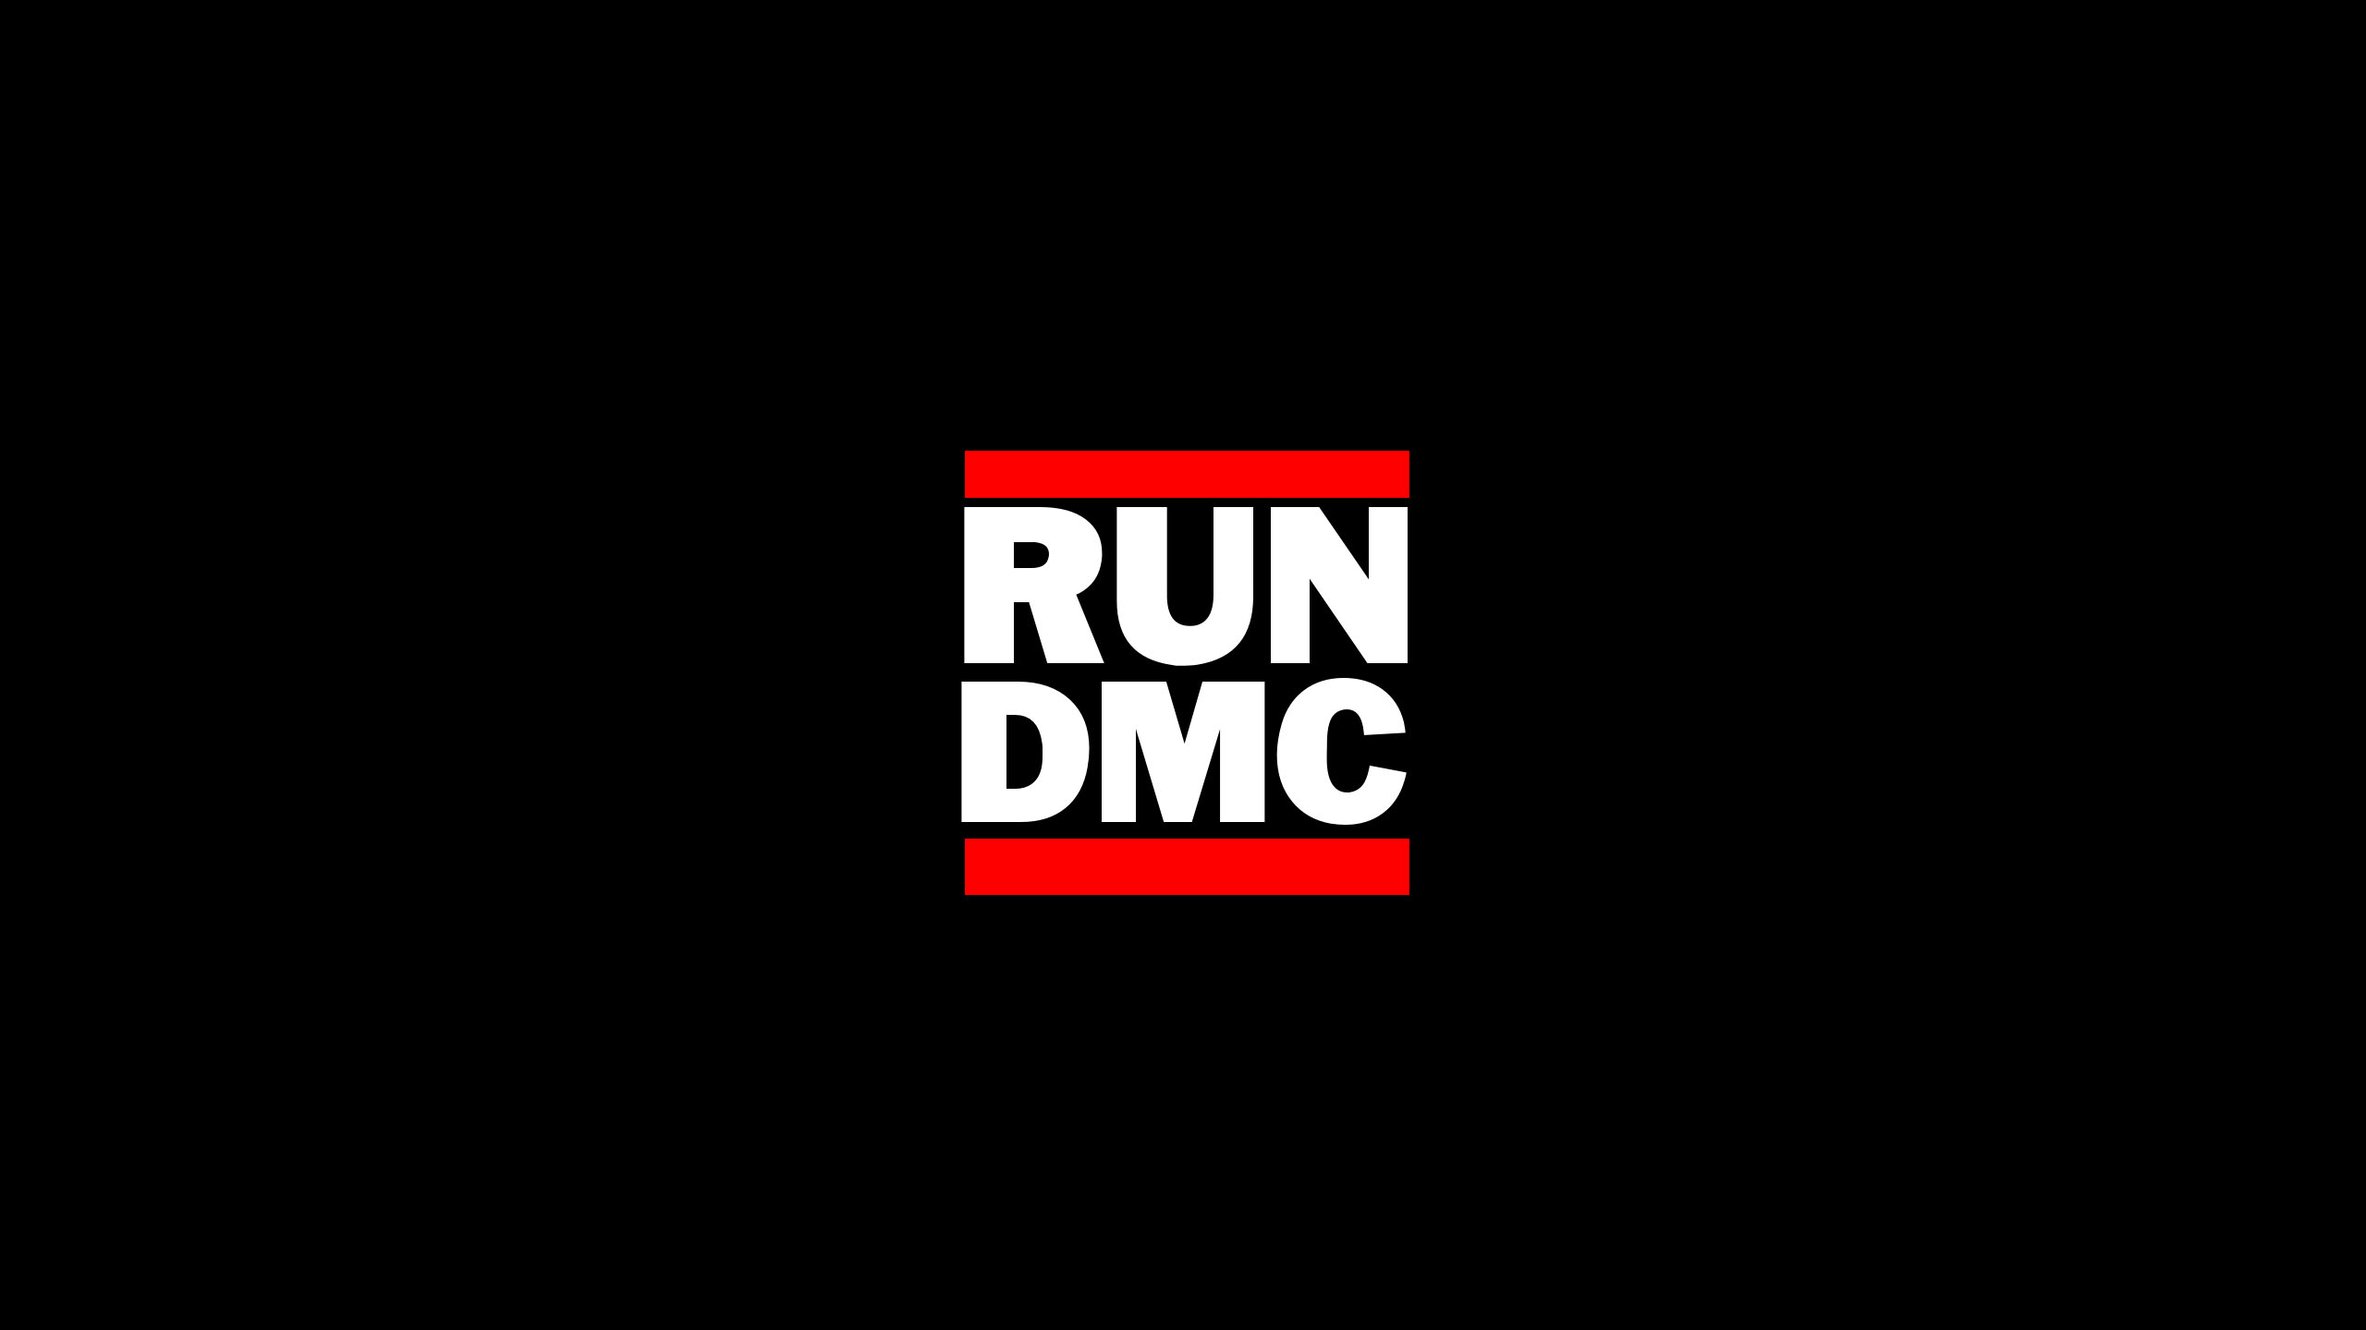 Casting Multiple Roles For A RUN DMC Music Video